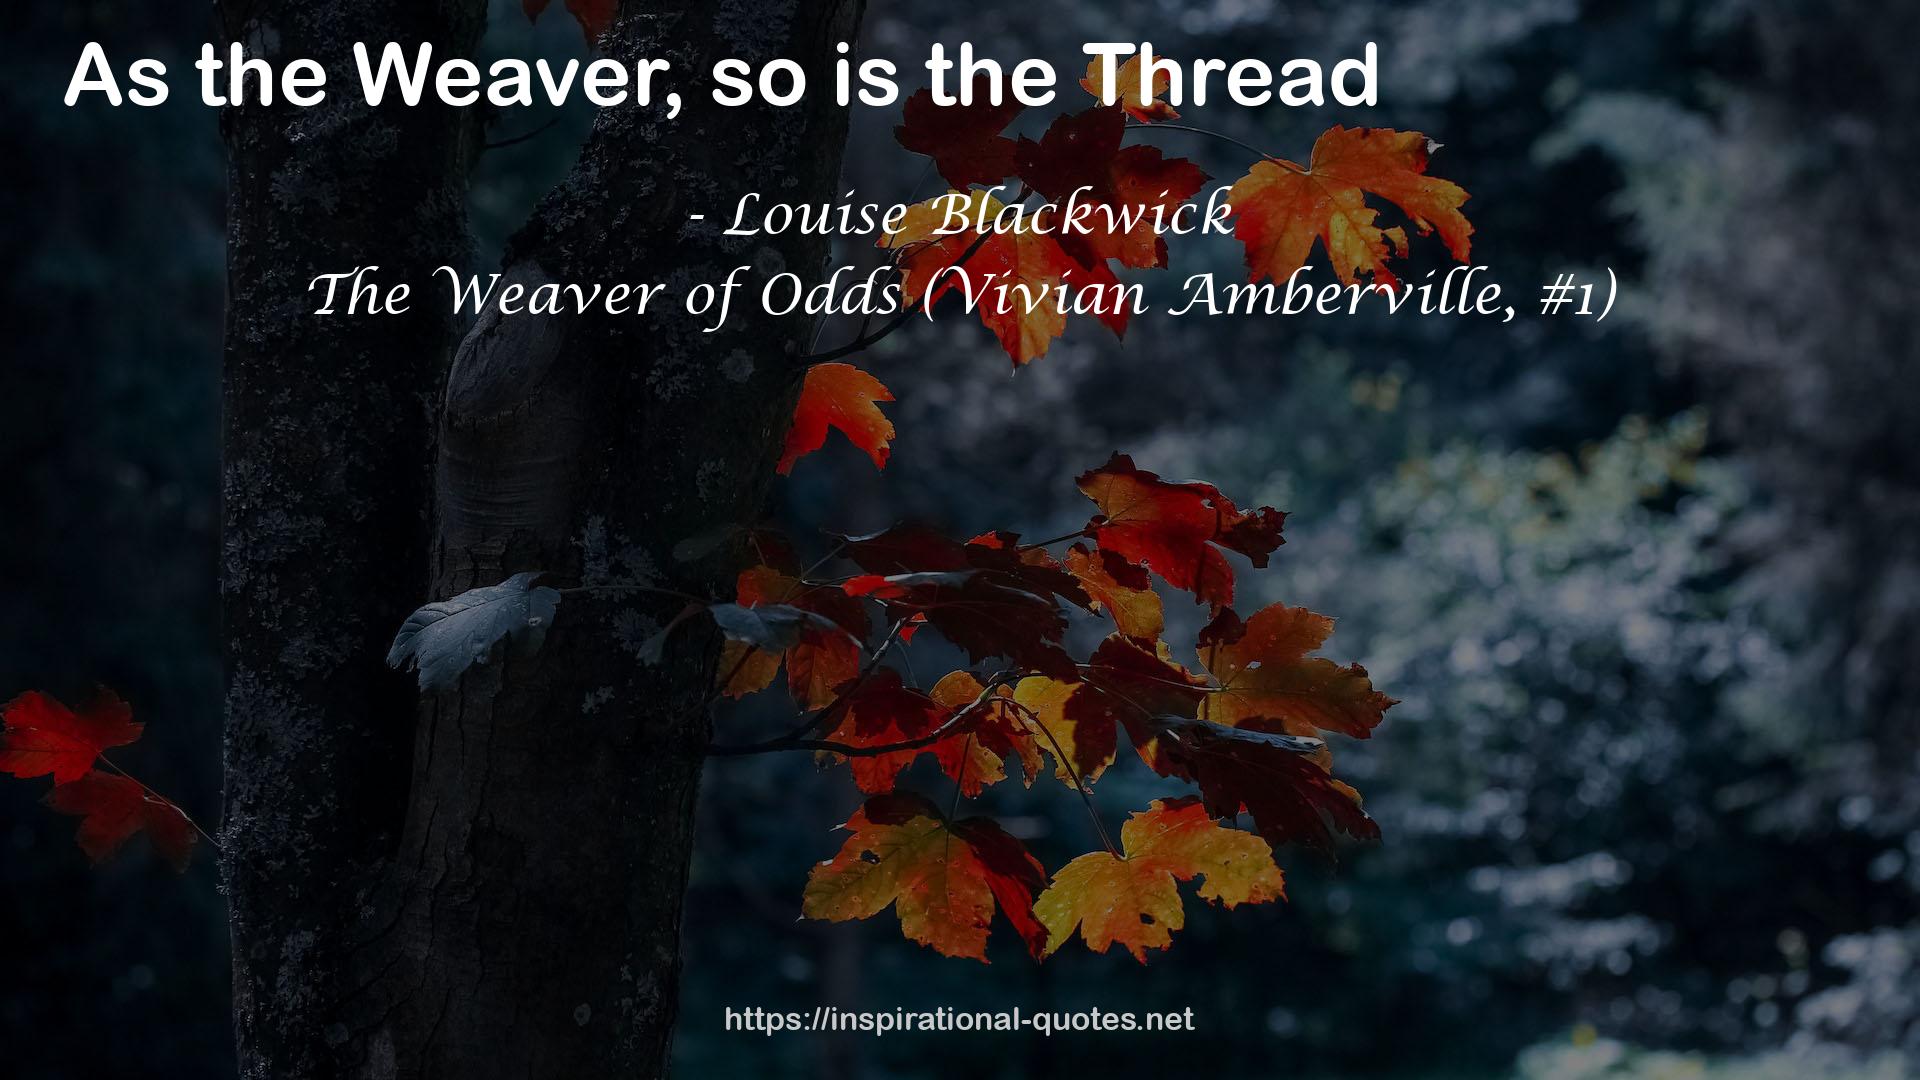 The Weaver of Odds (Vivian Amberville, #1) QUOTES